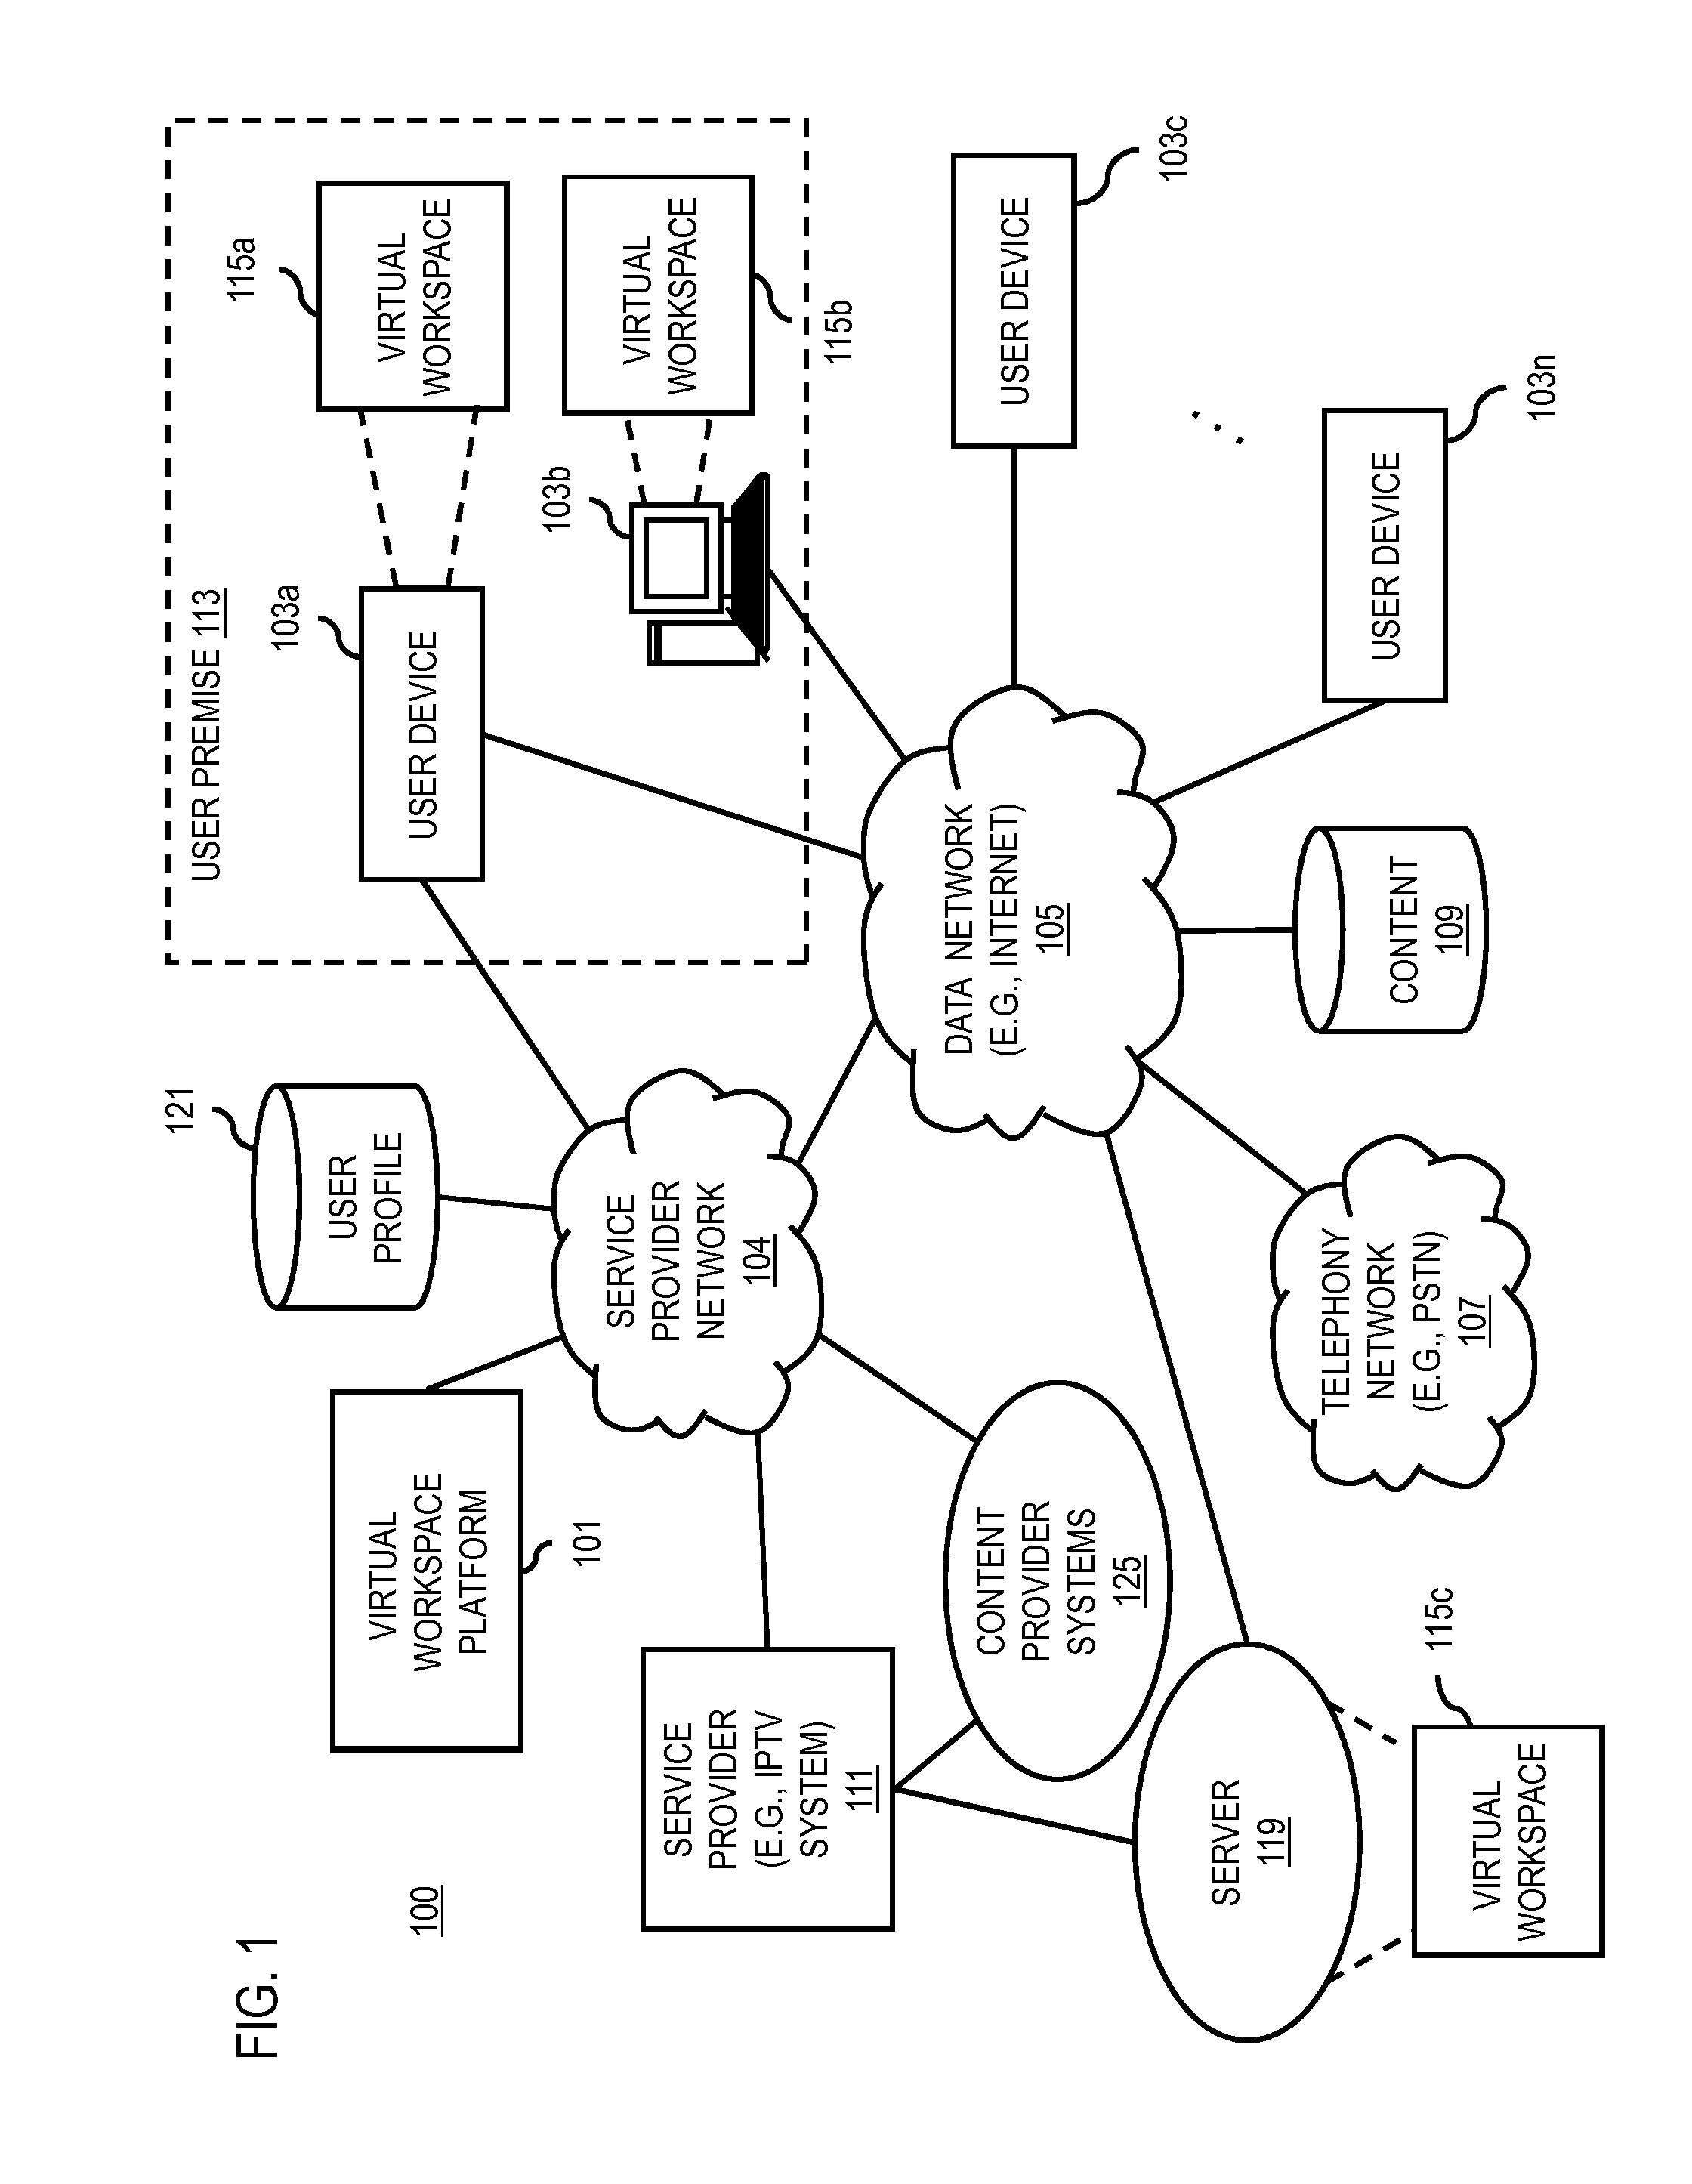 Method and apparatus for sharing virtual workspaces